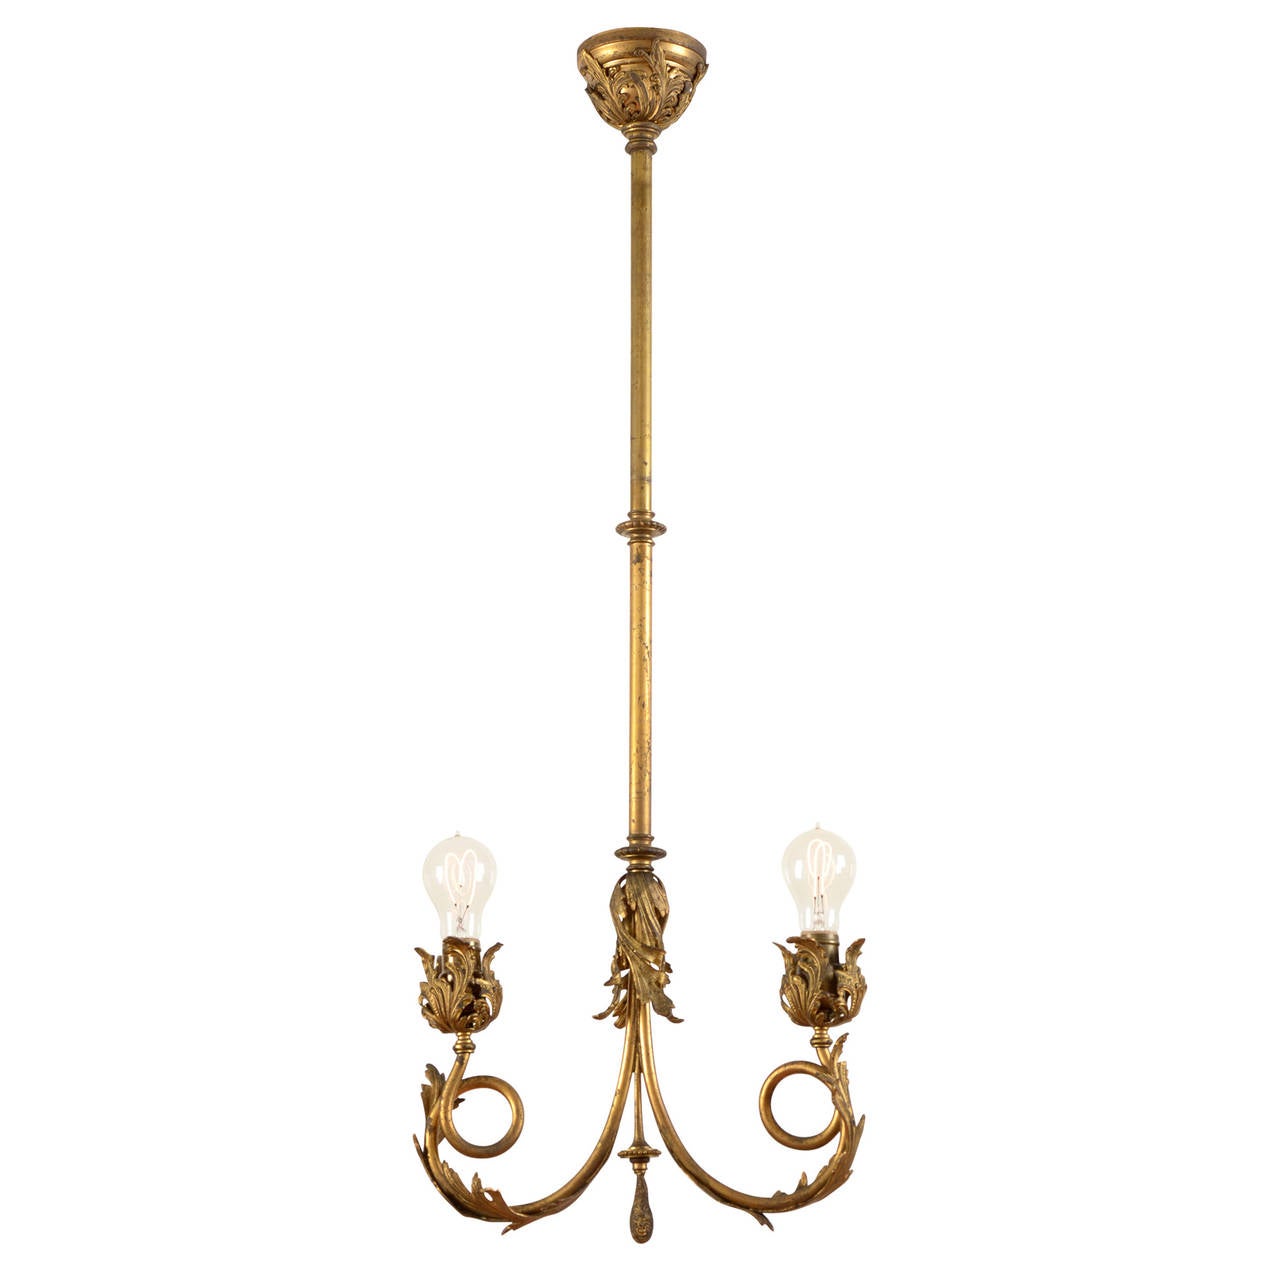 It was love at first sight when we laid eyes on this stunning gilt Rococo fin de siècle chandelier. Complete with original 'round sausage key' GE light sockets, this incredible piece features its original fire gilt finish, which carries the kind of